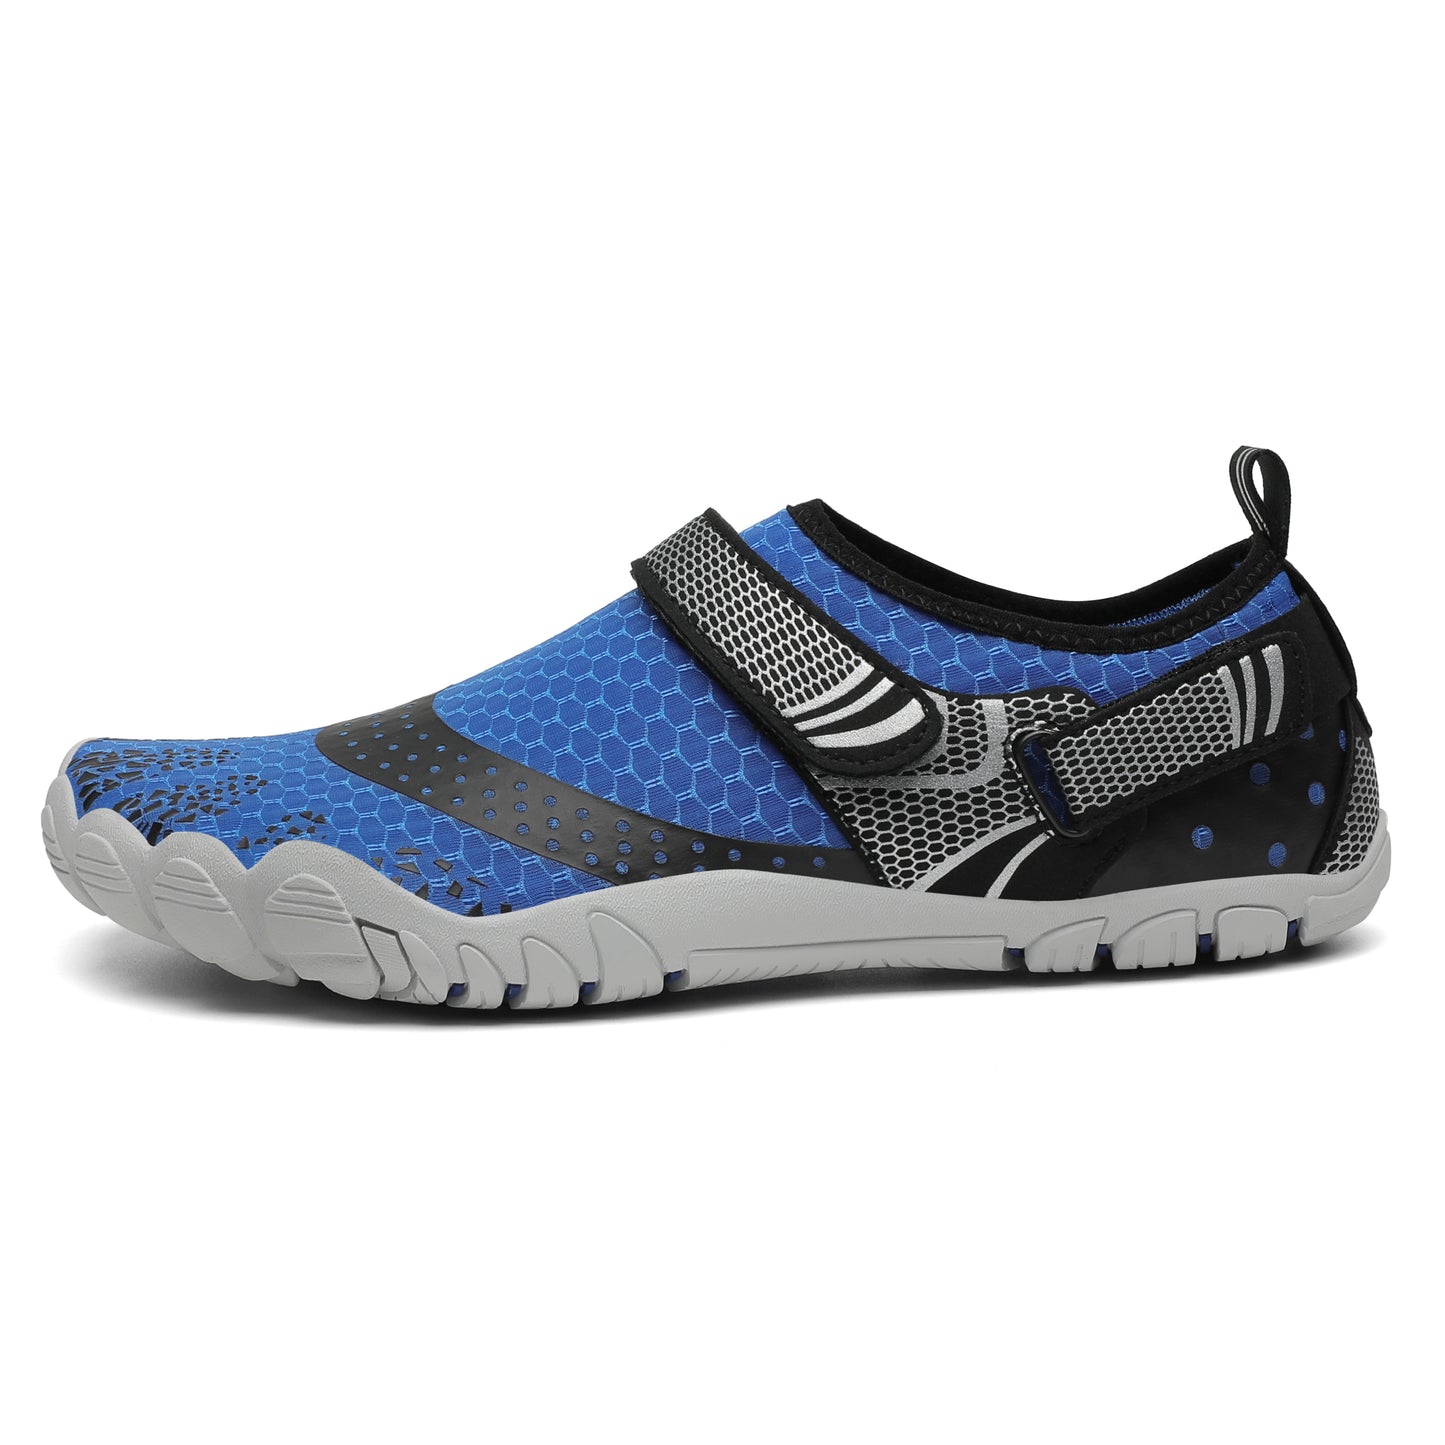 Dive V - Azul - Barefoot Water shoes